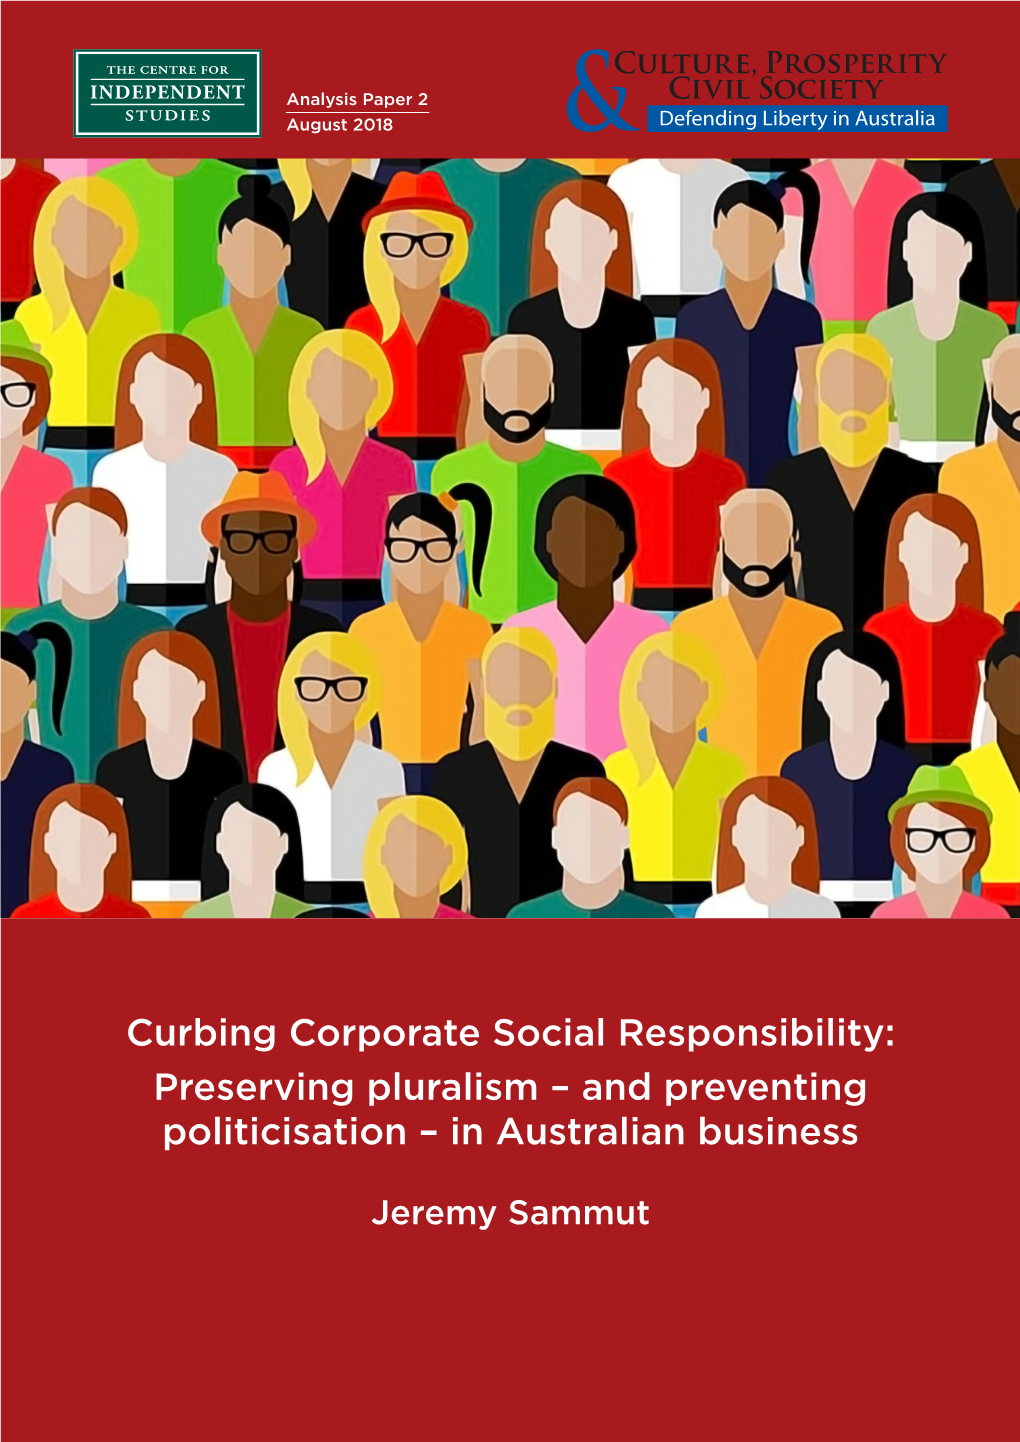 Curbing Corporate Social Responsibility: Preserving Pluralism – and Preventing Politicisation – in Australian Business